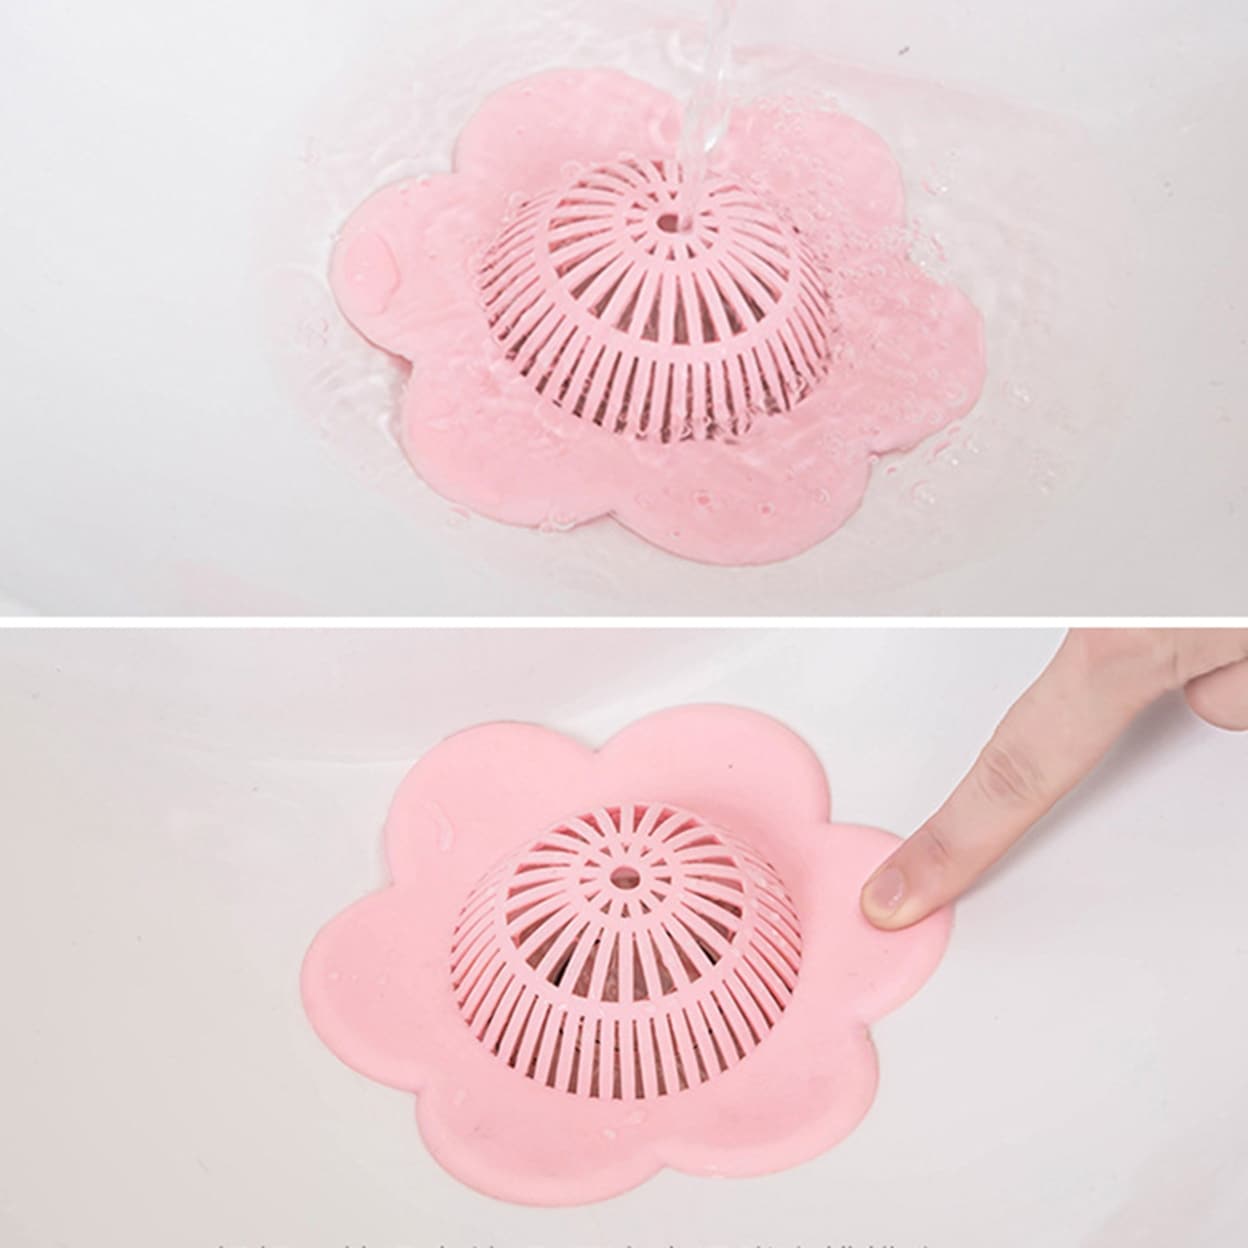 https://ak1.ostkcdn.com/images/products/is/images/direct/d950243adcd5da88c24e3e7f454ee179e9fa6911/Flower-Shape-Bathtub-Shower-Drain-Suction-Cup-Sink-Hair-Catcher-Filter-Strainer.jpg